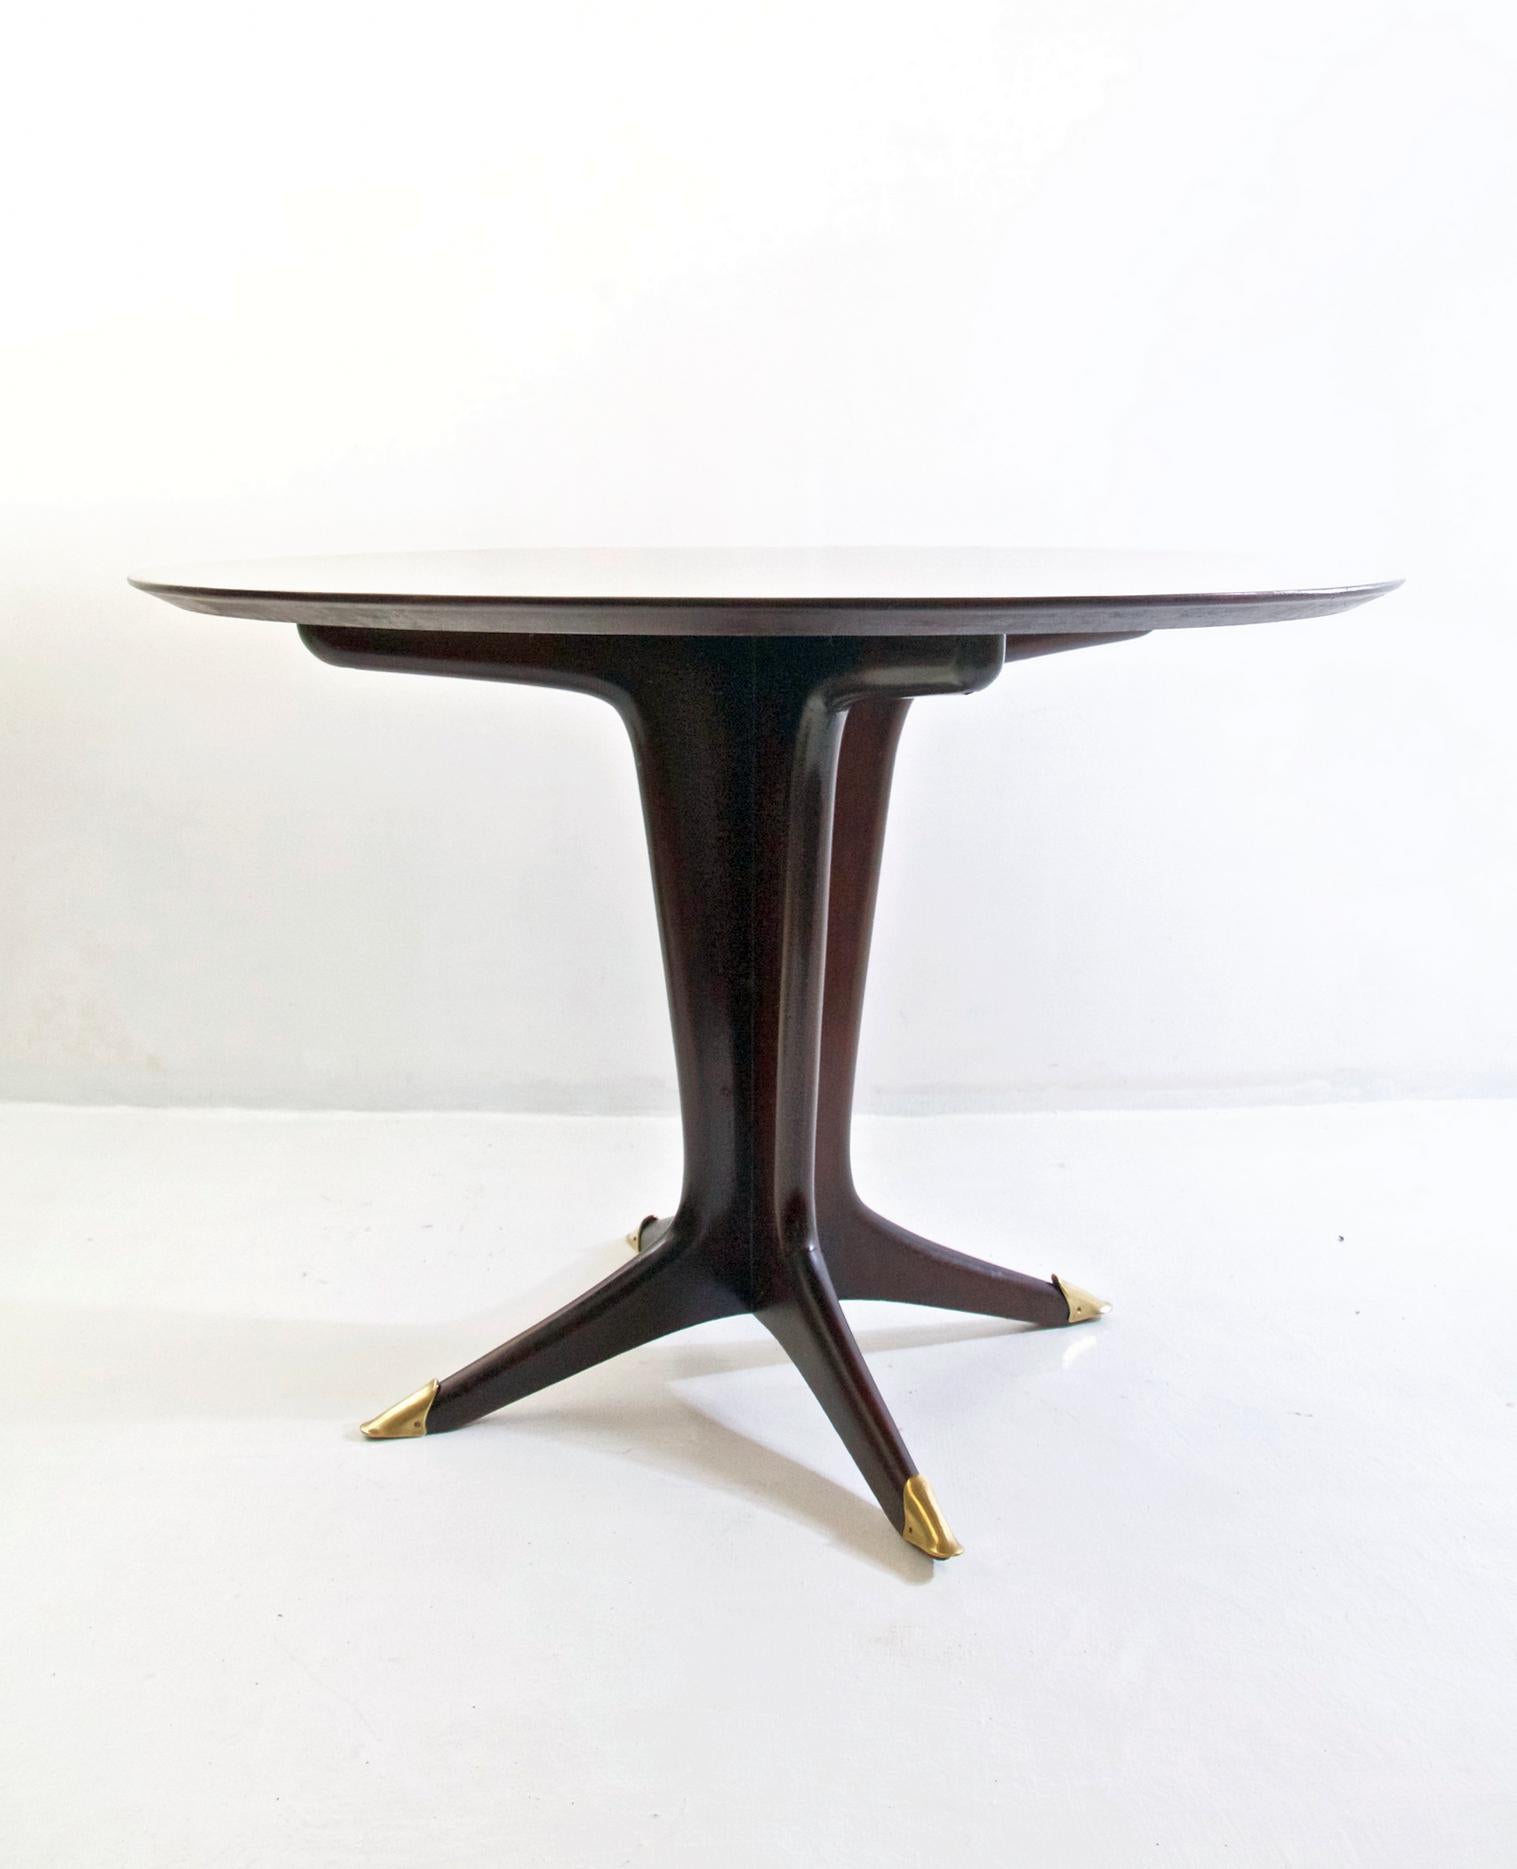 A stunningly beautiful midcentury round dining table in walnut and brass capped feet. The tabletop which has been bookmatched rests on a center pillar in wood with four legs. The entire table has been restored and is in perfect condition.